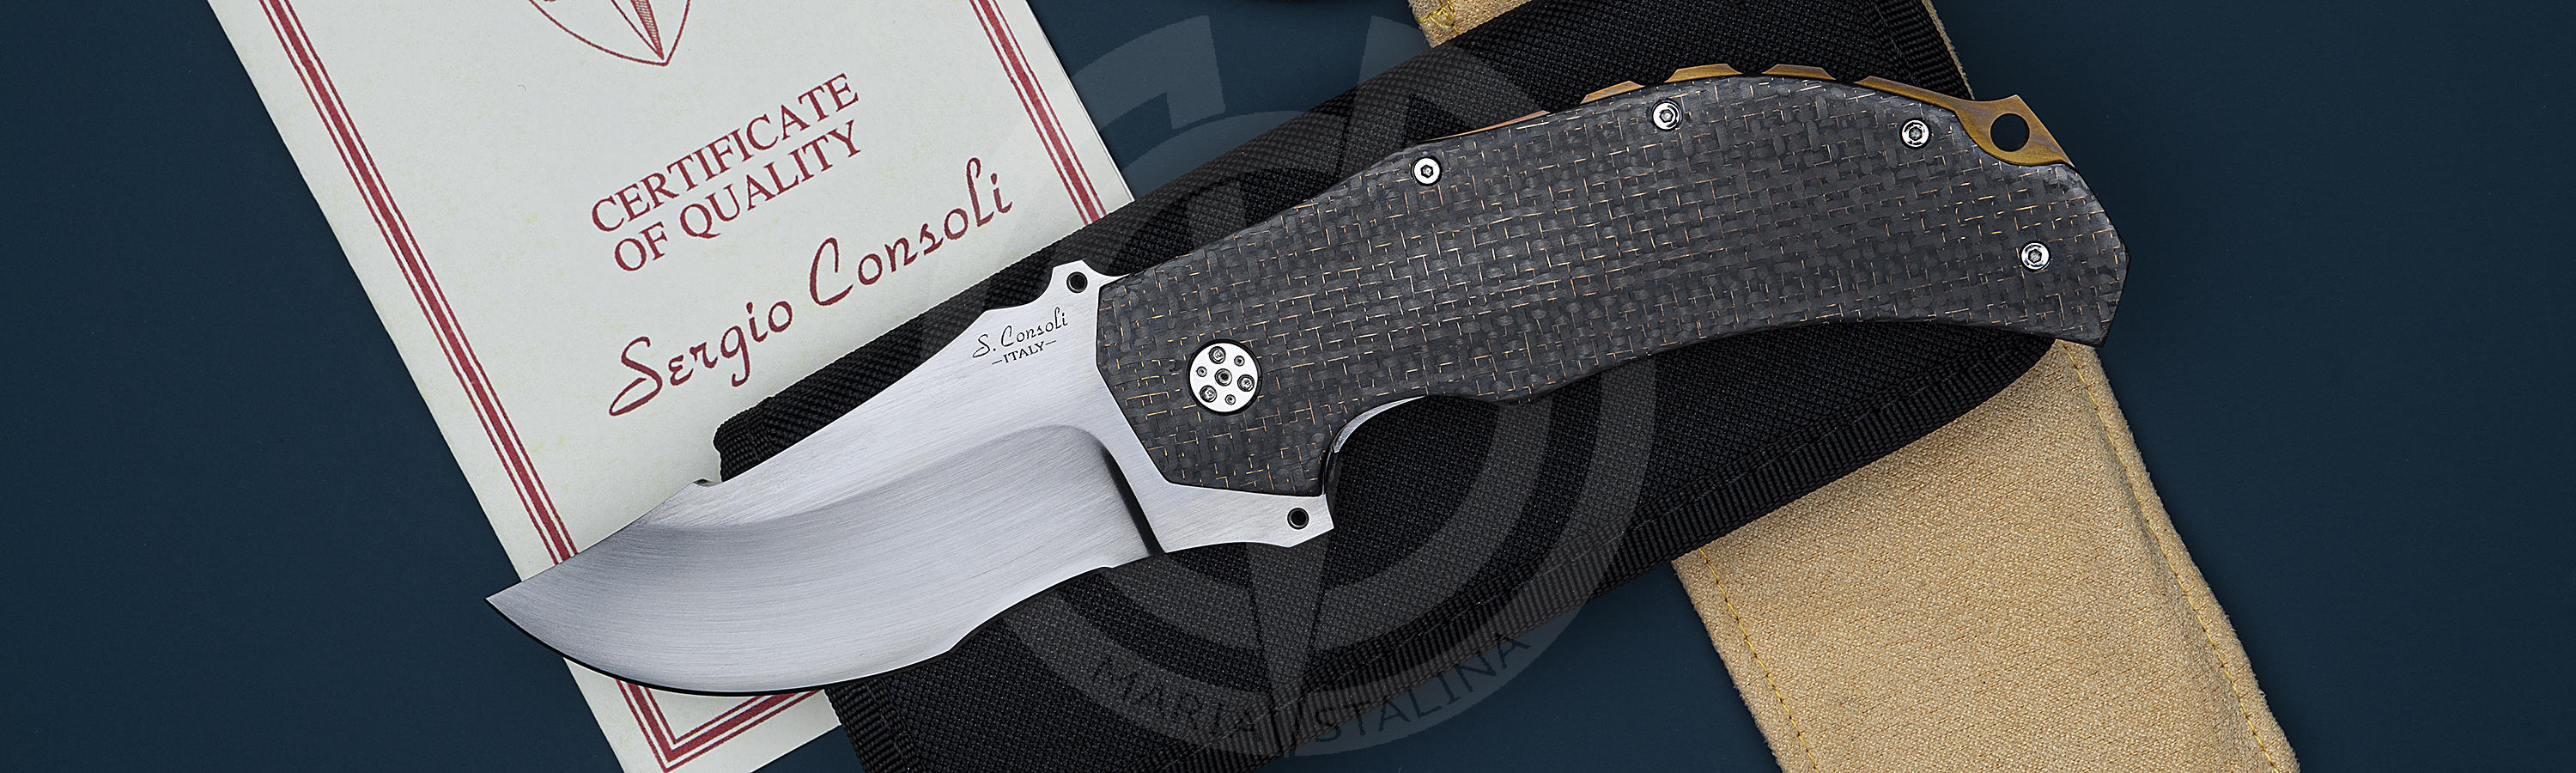 The knife N280 with a certificate